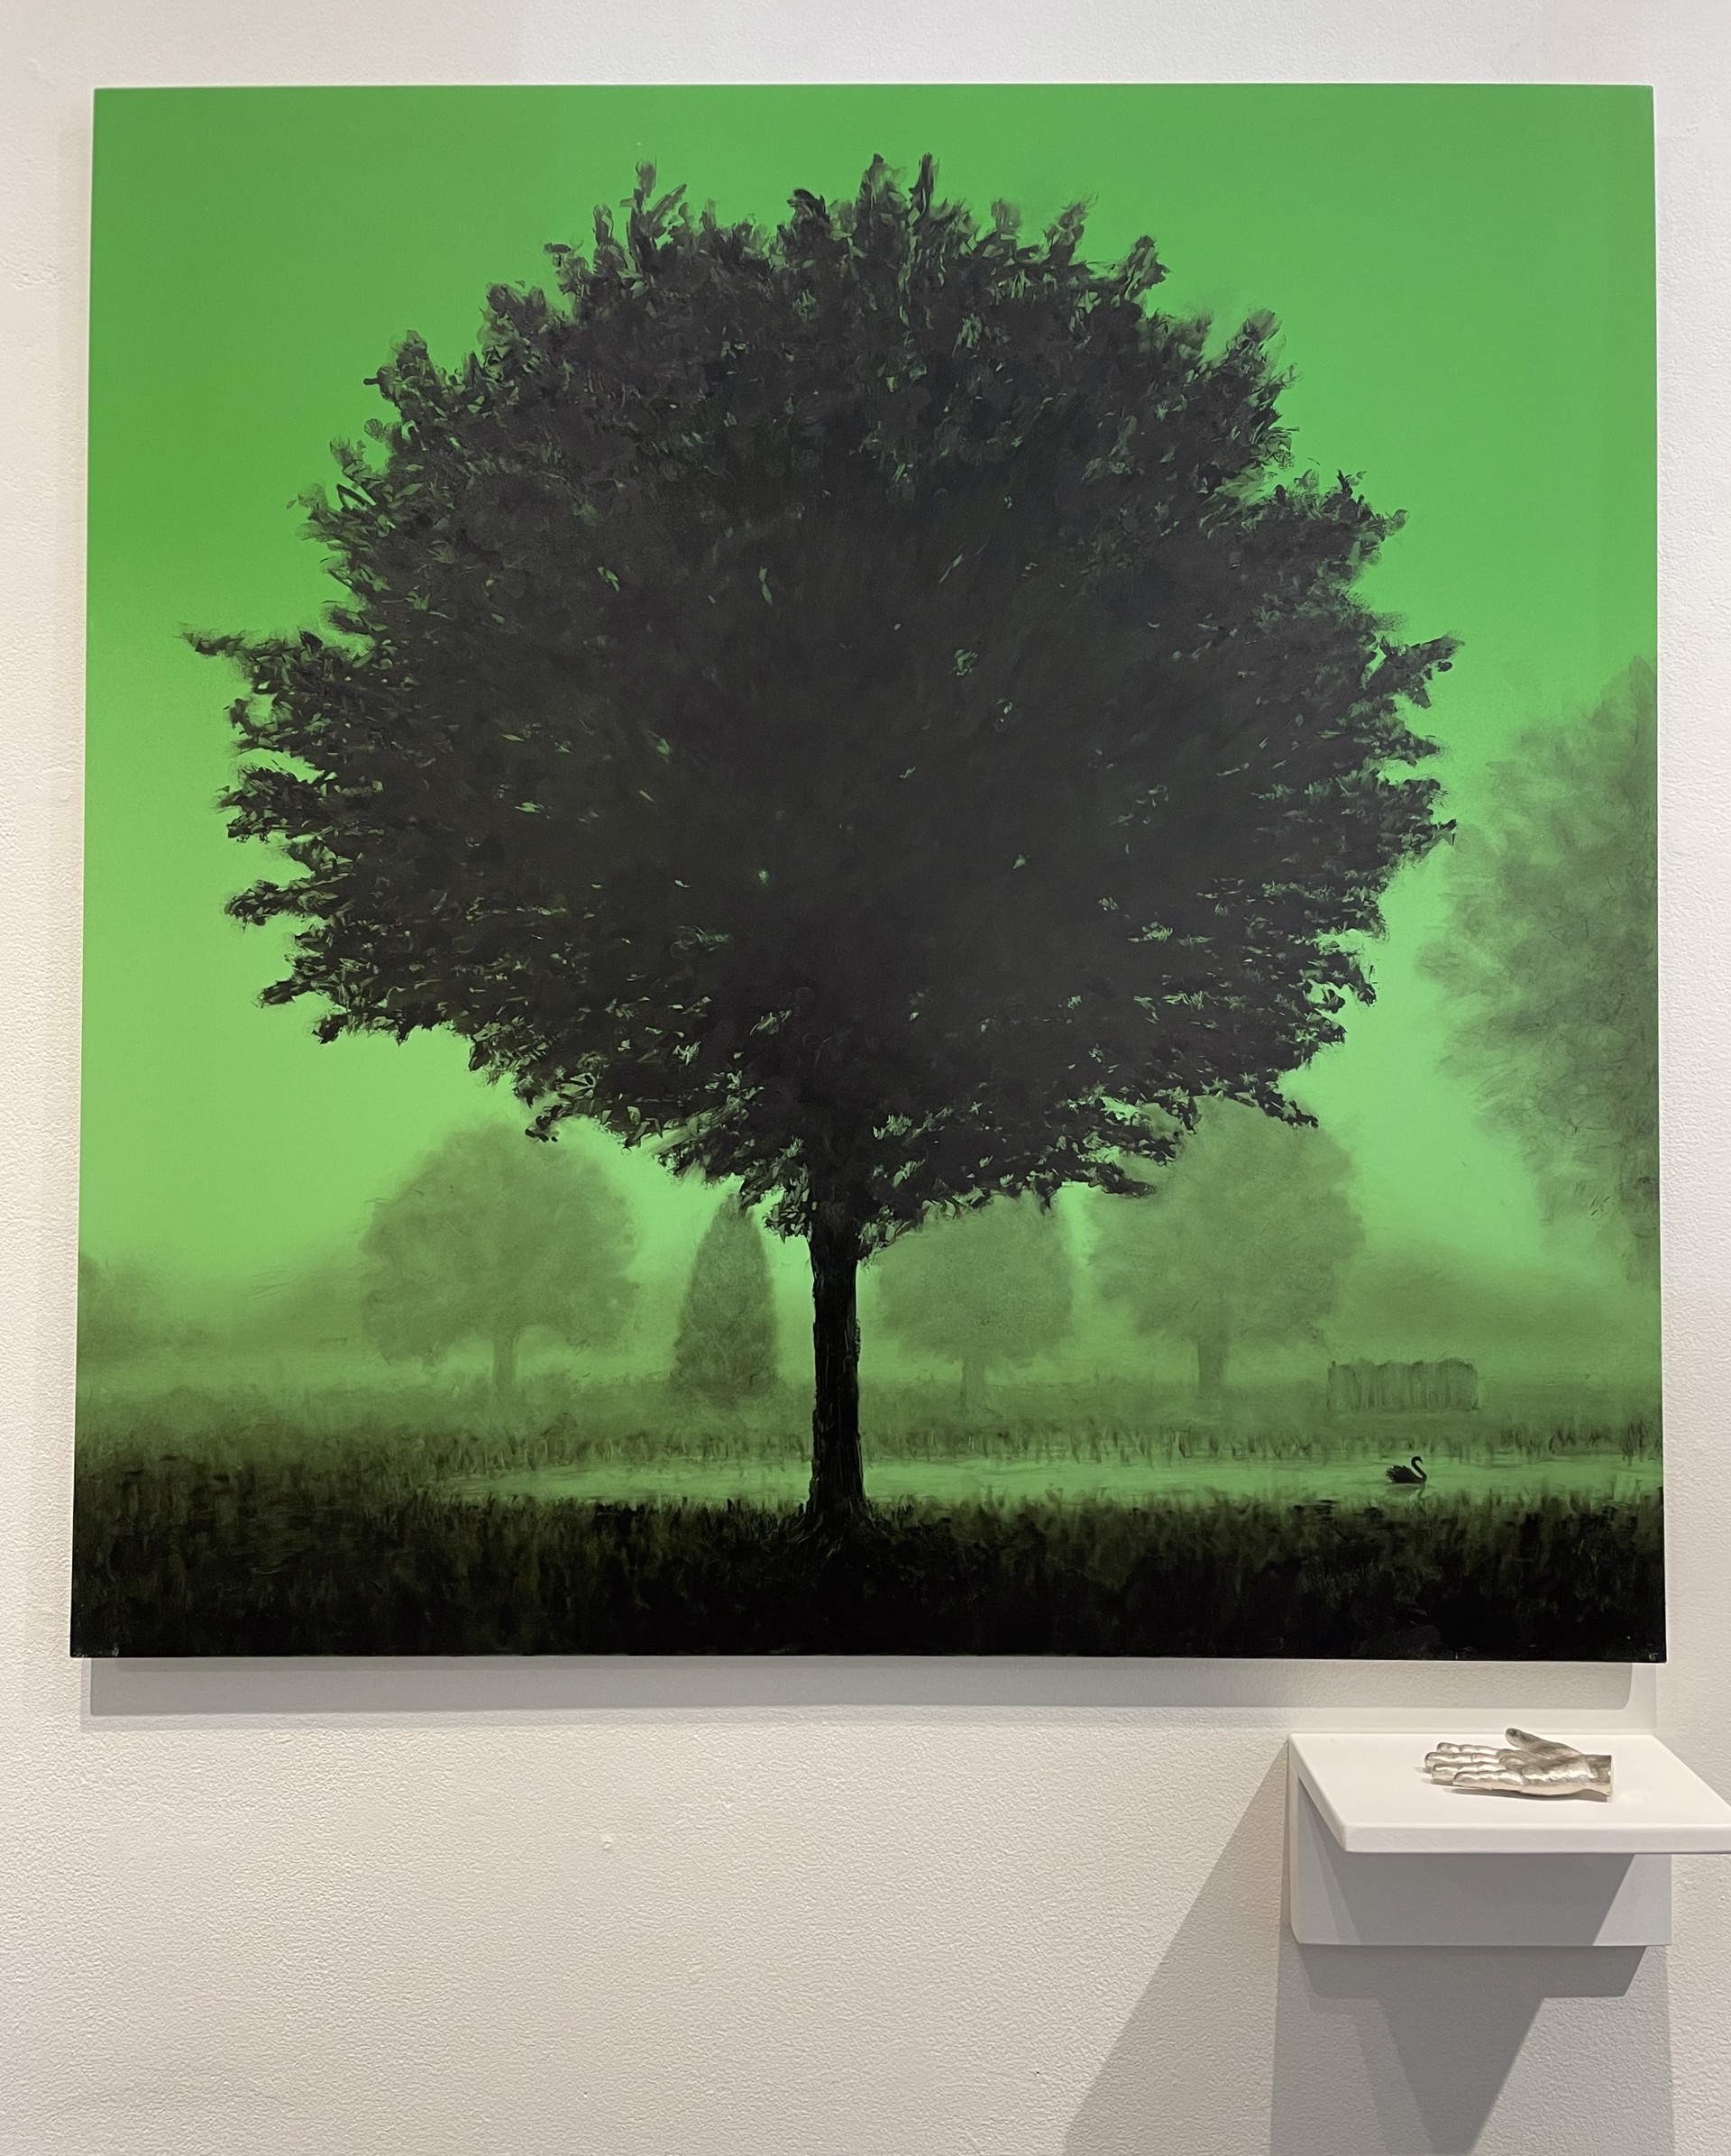 Startling Beauty and Anomie (Green) by Lauren Ewing